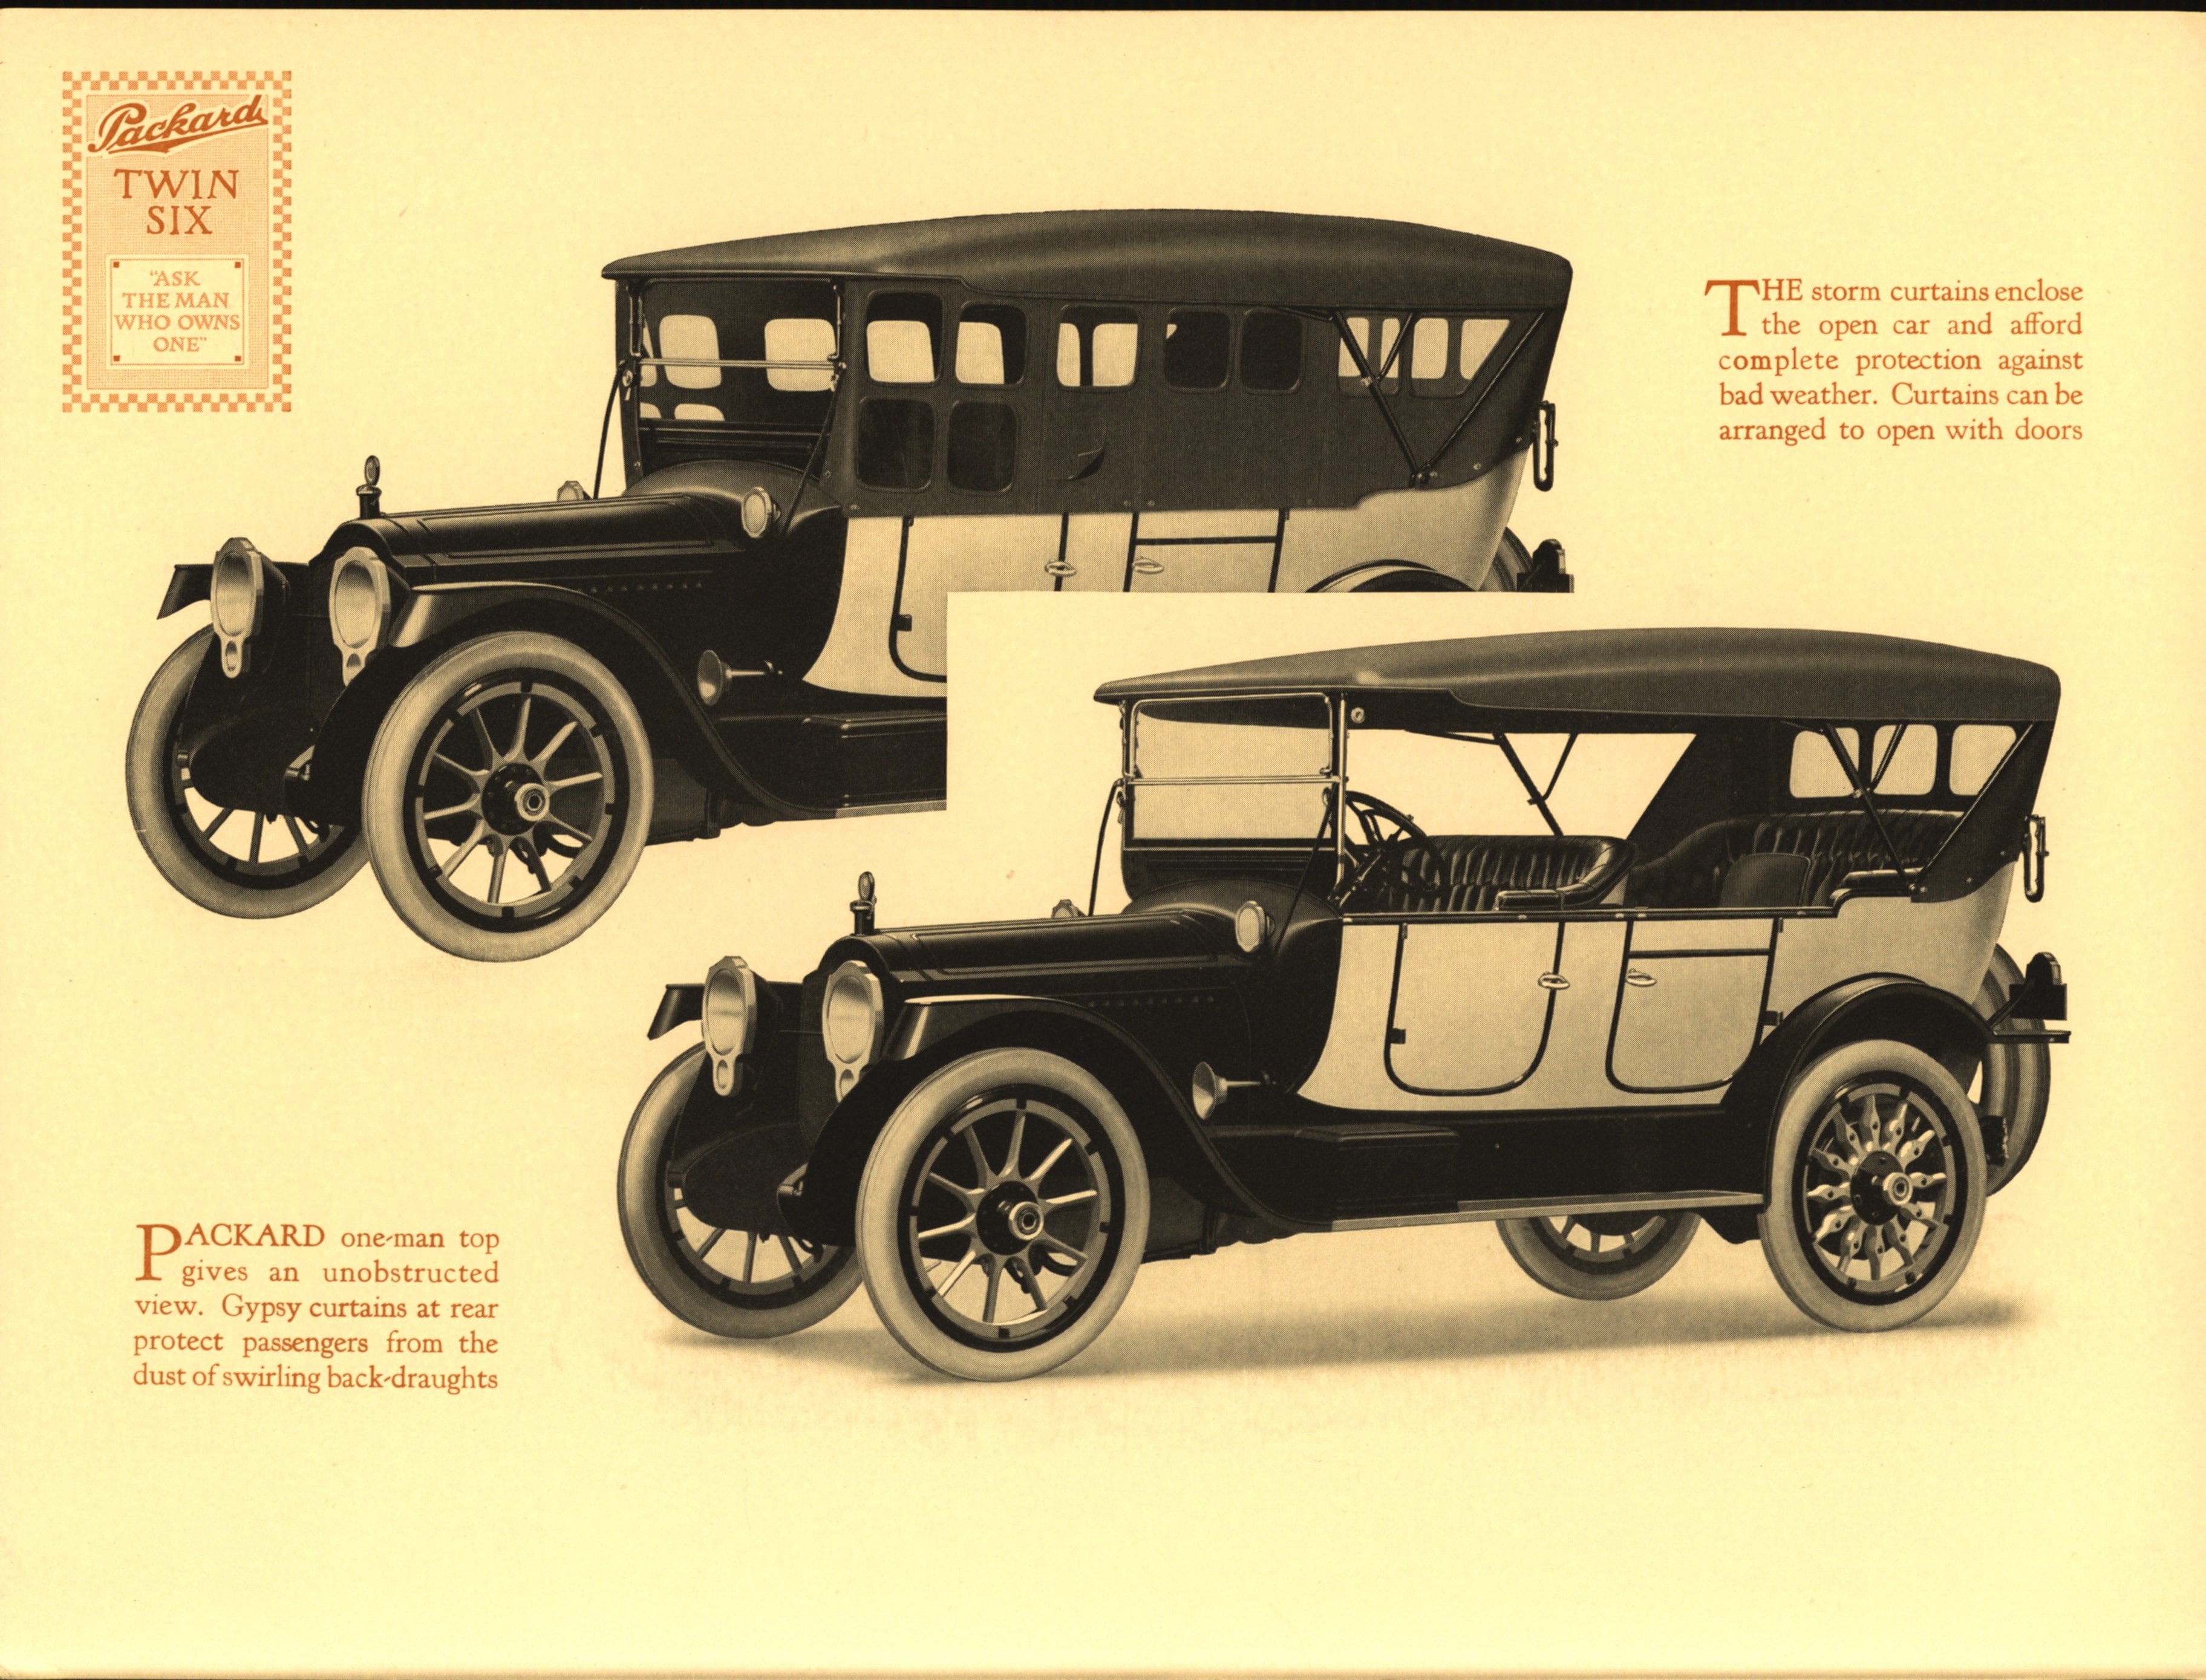 1914 Packard TWIN SIX 1-25 AND 1-35 Archives - Chuck's Toyland